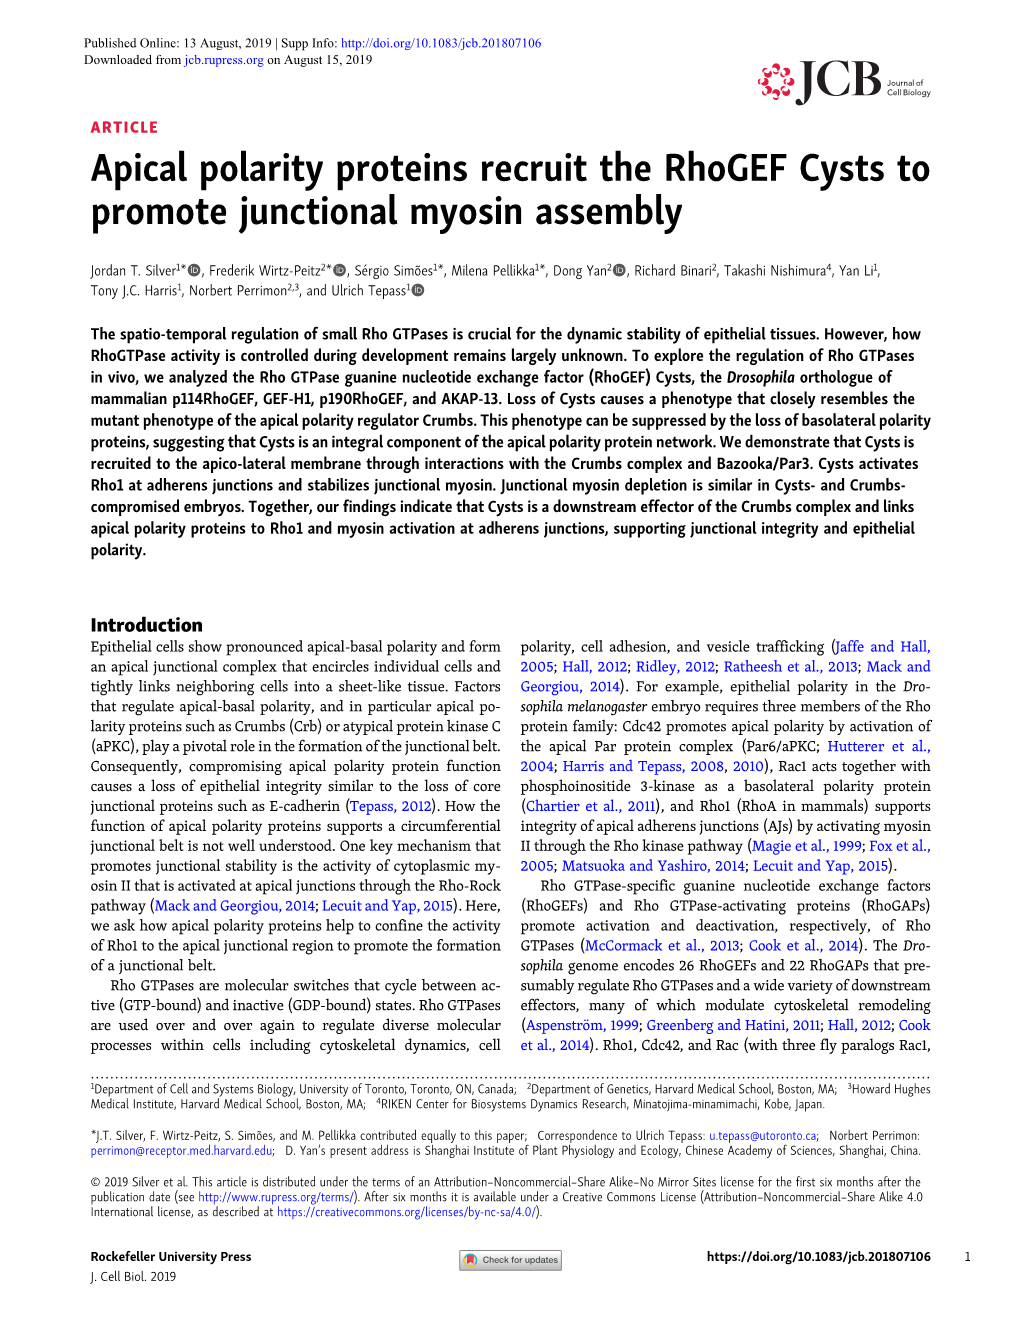 Apical Polarity Proteins Recruit the Rhogef Cysts to Promote Junctional Myosin Assembly